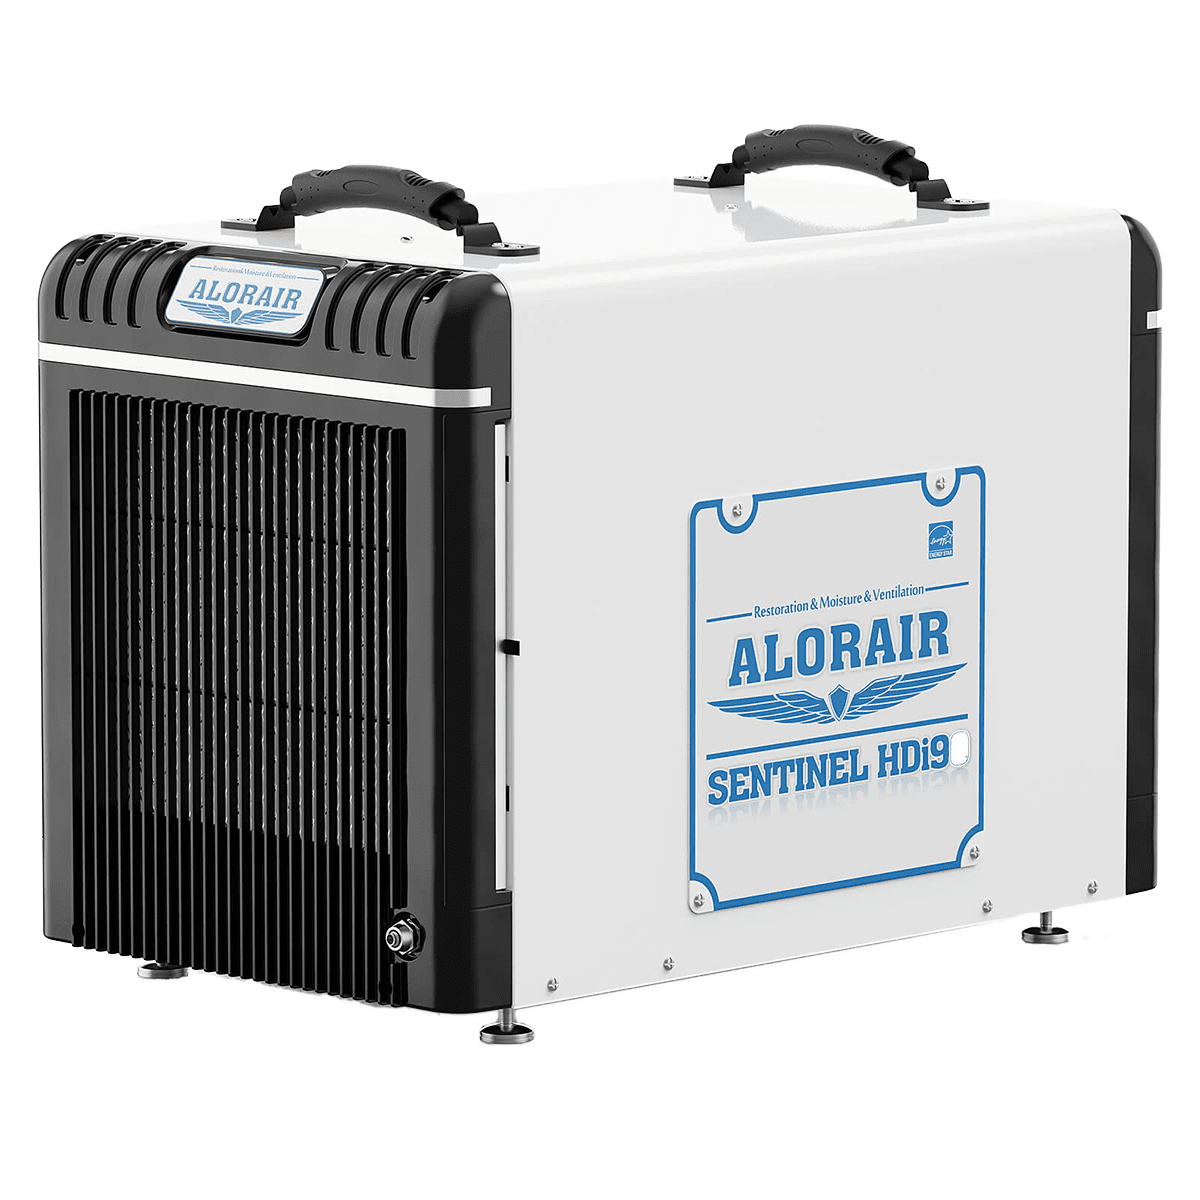 AlorAir Sentinel Energy Star 90 Pint at AHAM Dehumidifier for Crawl Spaces, Basements, or Water Damage Up to 2,600 Sq. Ft. - Built-In Pump